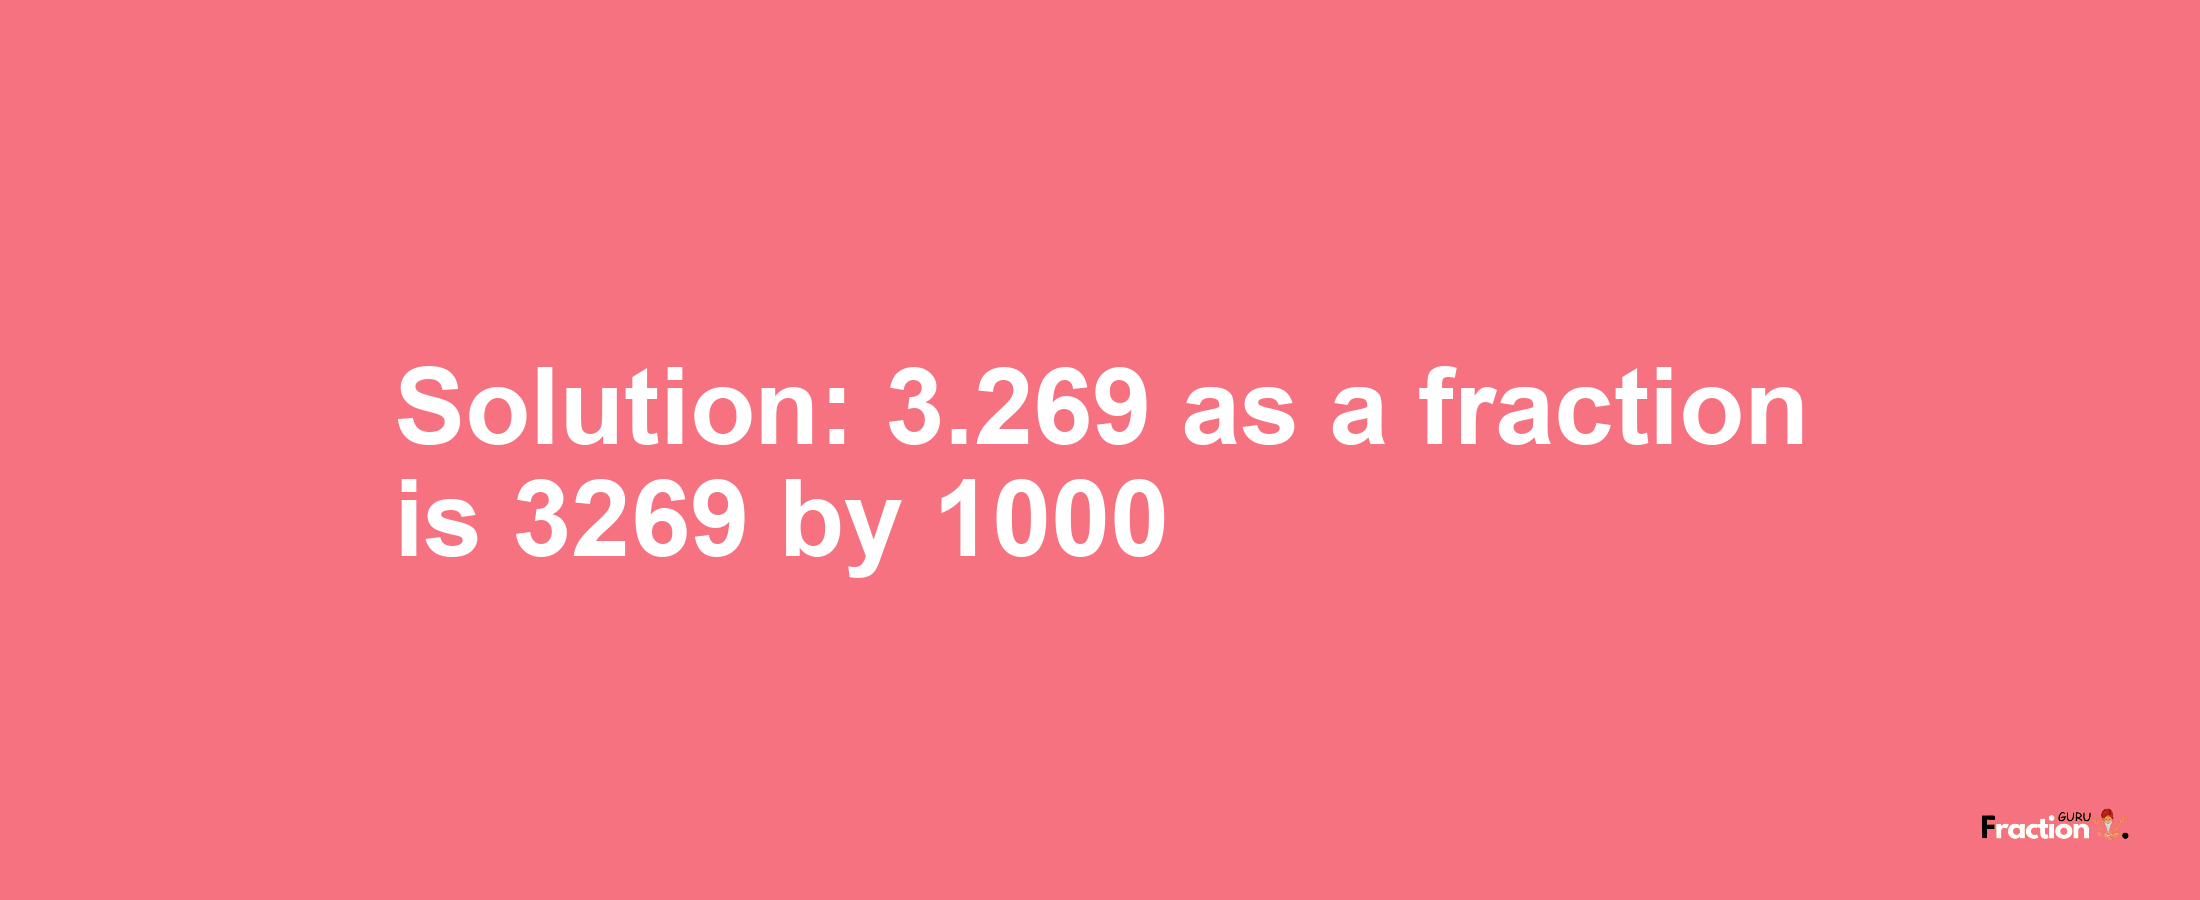 Solution:3.269 as a fraction is 3269/1000